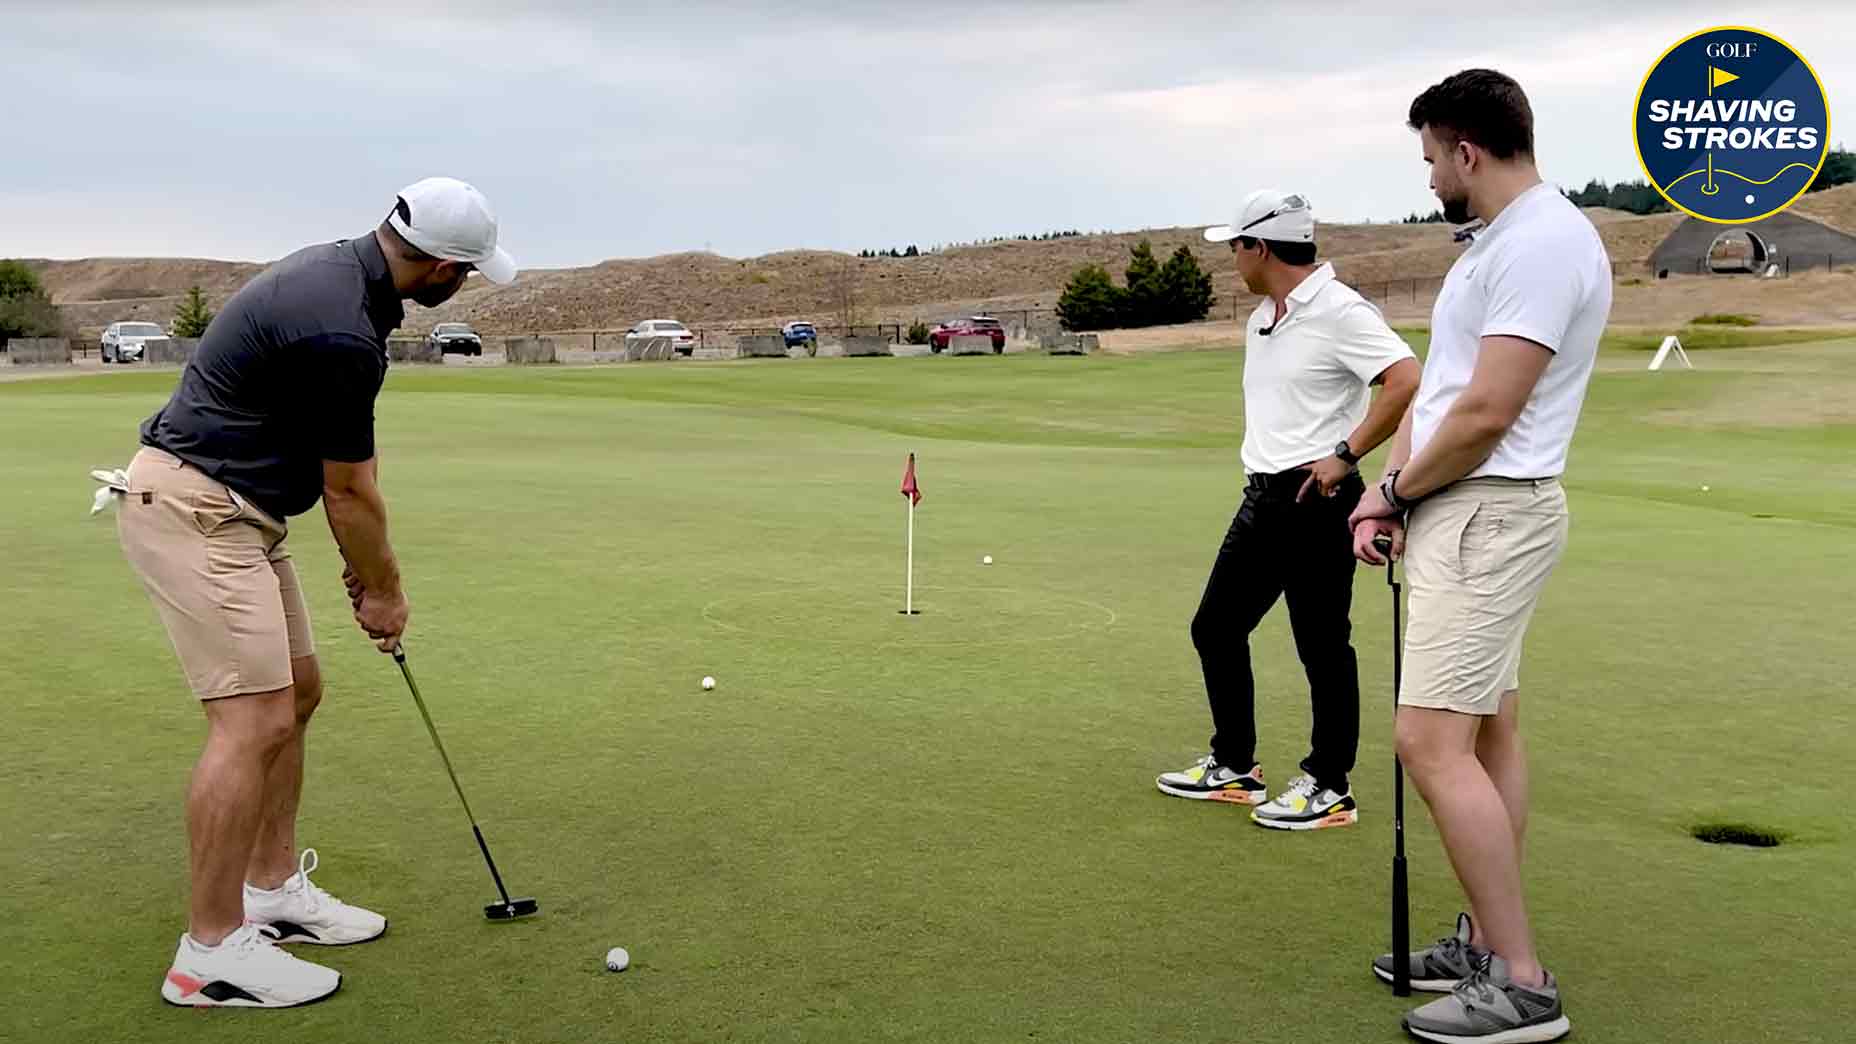 Increased pressure can lead to poor execution, so GOLF Teacher to Watch Ryan Young suggests this putting practice drill to build confidence